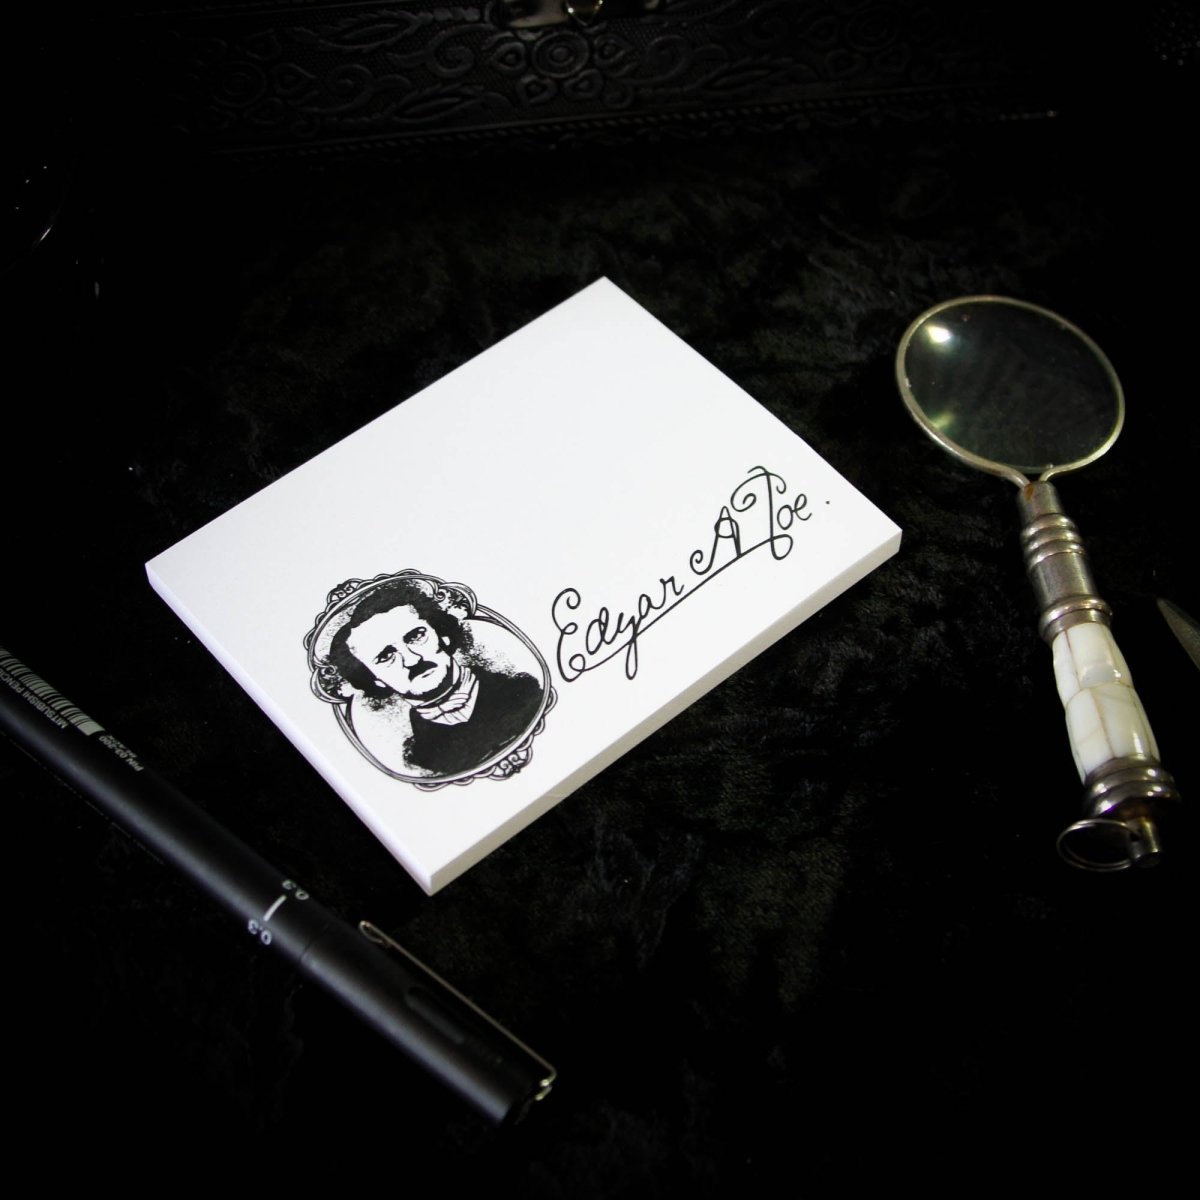 Edgar Allan Poe Sticky Notes - The Gothic Stationery Company - Notepads